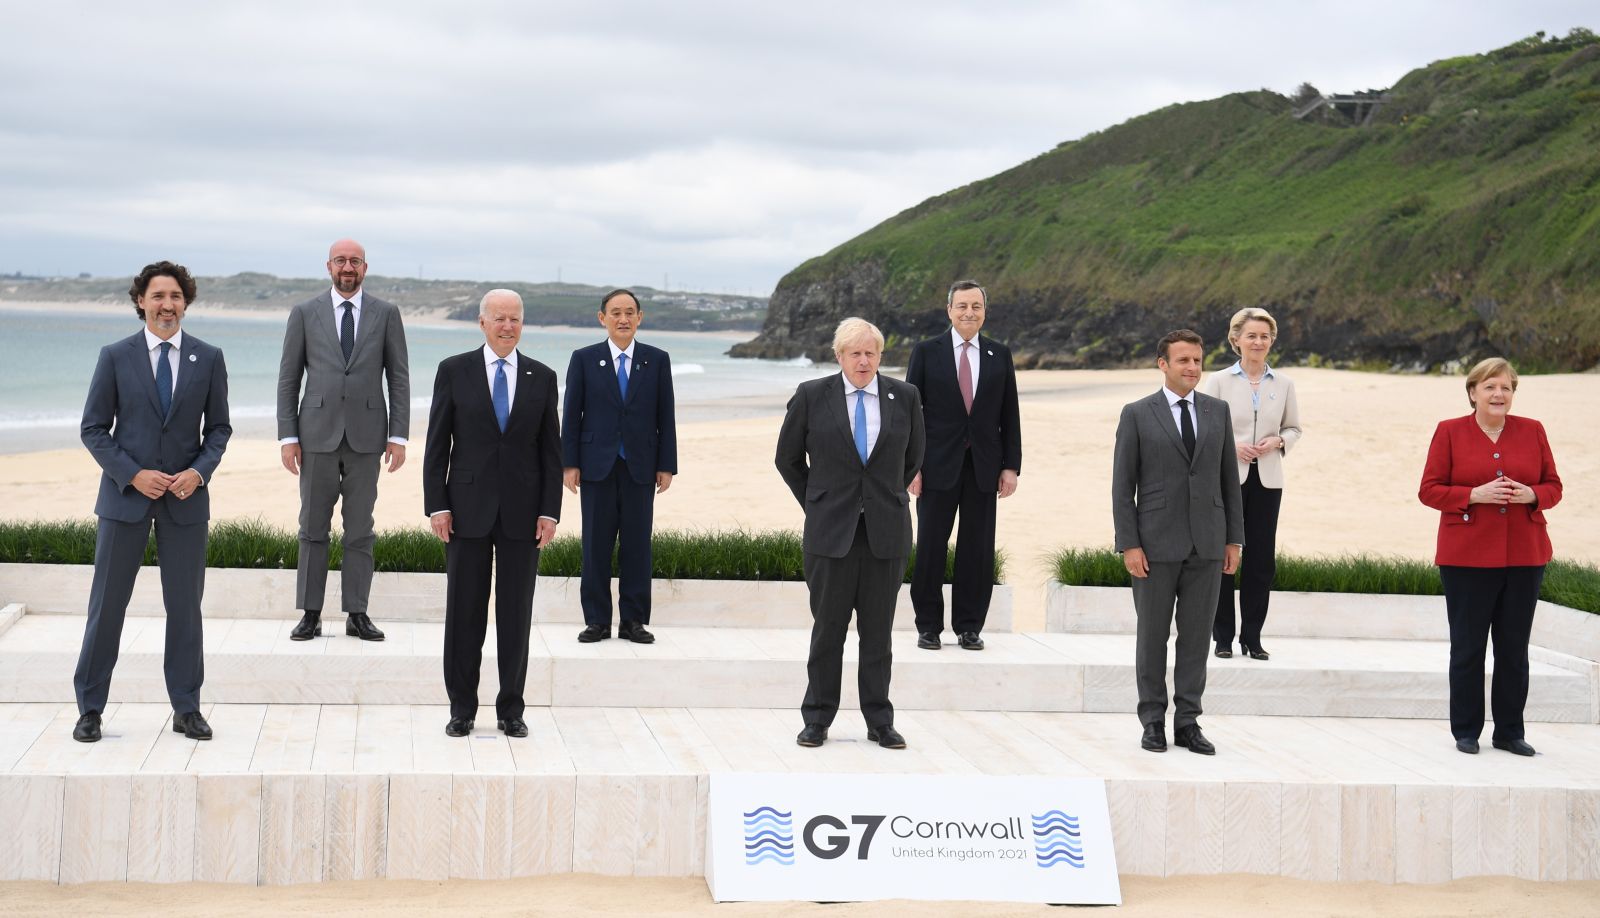 epa09262172 (L-R) Justin Trudeau, Canada's prime minister; Charles Michel, president of the European Council; US President Joe Biden, Yoshihide Suga, Japan's prime minister; Boris Johnson, Britain's prime minister; Mario Draghi, Italy's prime minister; Emmanuel Macron, France's president; Ursula von der Leyen, president of the European Commission and Angela Merkel, Germany's chancellor pose during the family photo on the first day of the Group of Seven leaders summit in Carbis Bay, Cornwall, Britain, 11 June 2021.  EPA/NEIL HALL/INTERNATIONAL POOL